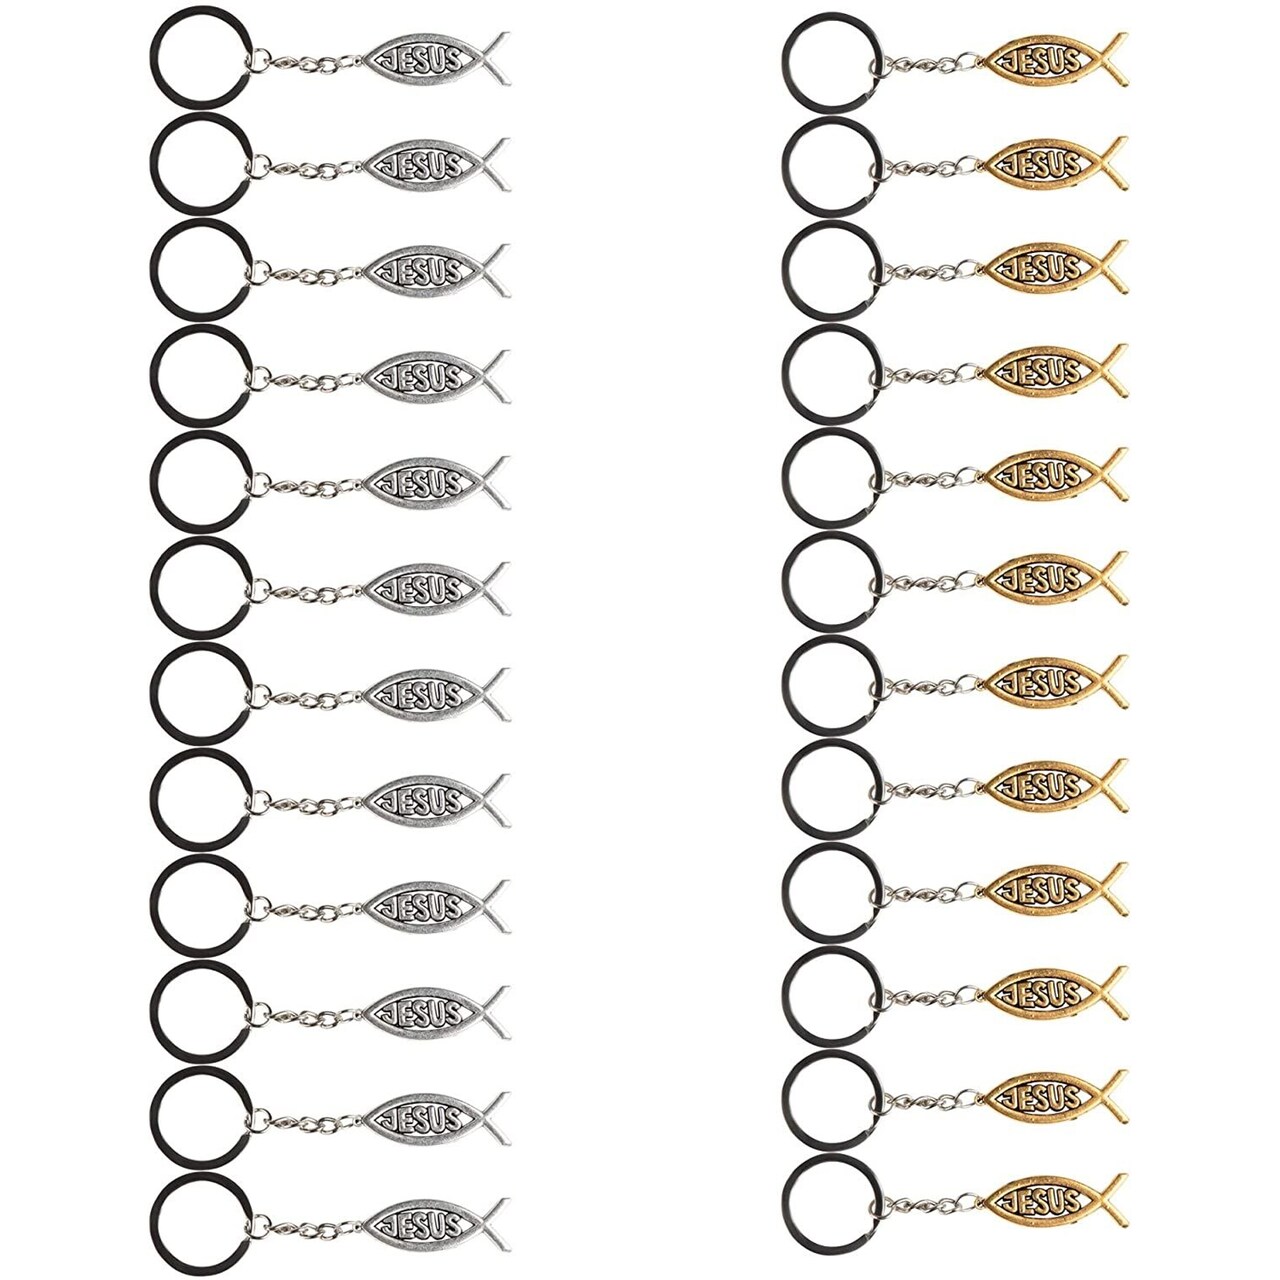 24 Pack Metal Jesus Fish Keychains, Christian Religious Gifts for Women and Men, Bulk Key Rings for Easter Party, Family Reunion Favors (Silver and Gold-Colored)